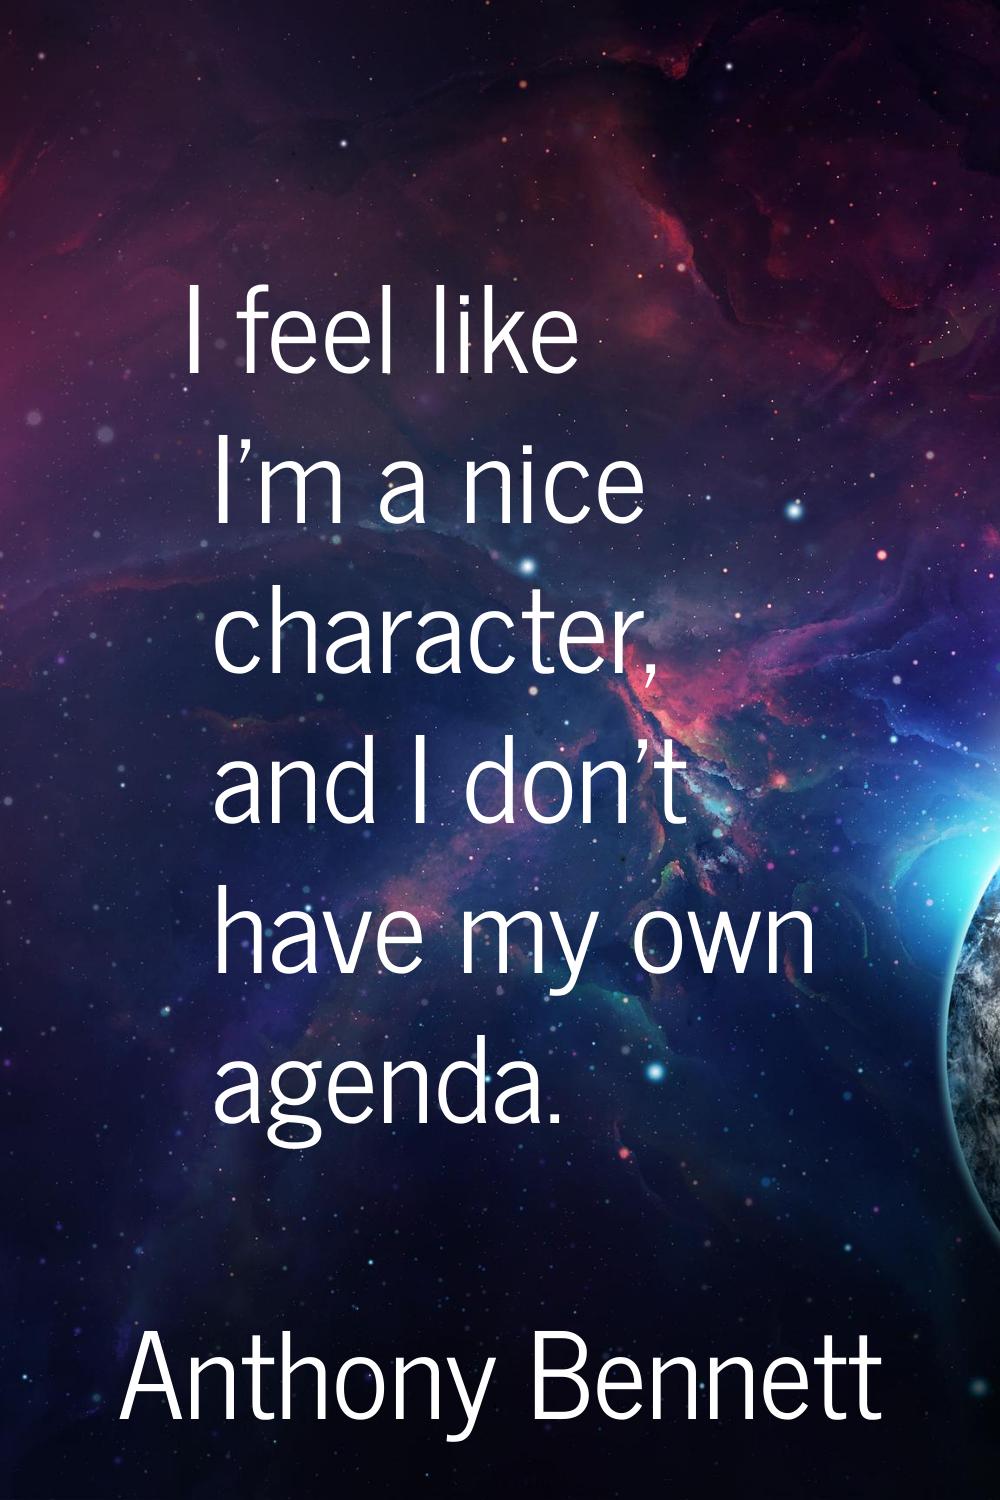 I feel like I'm a nice character, and I don't have my own agenda.